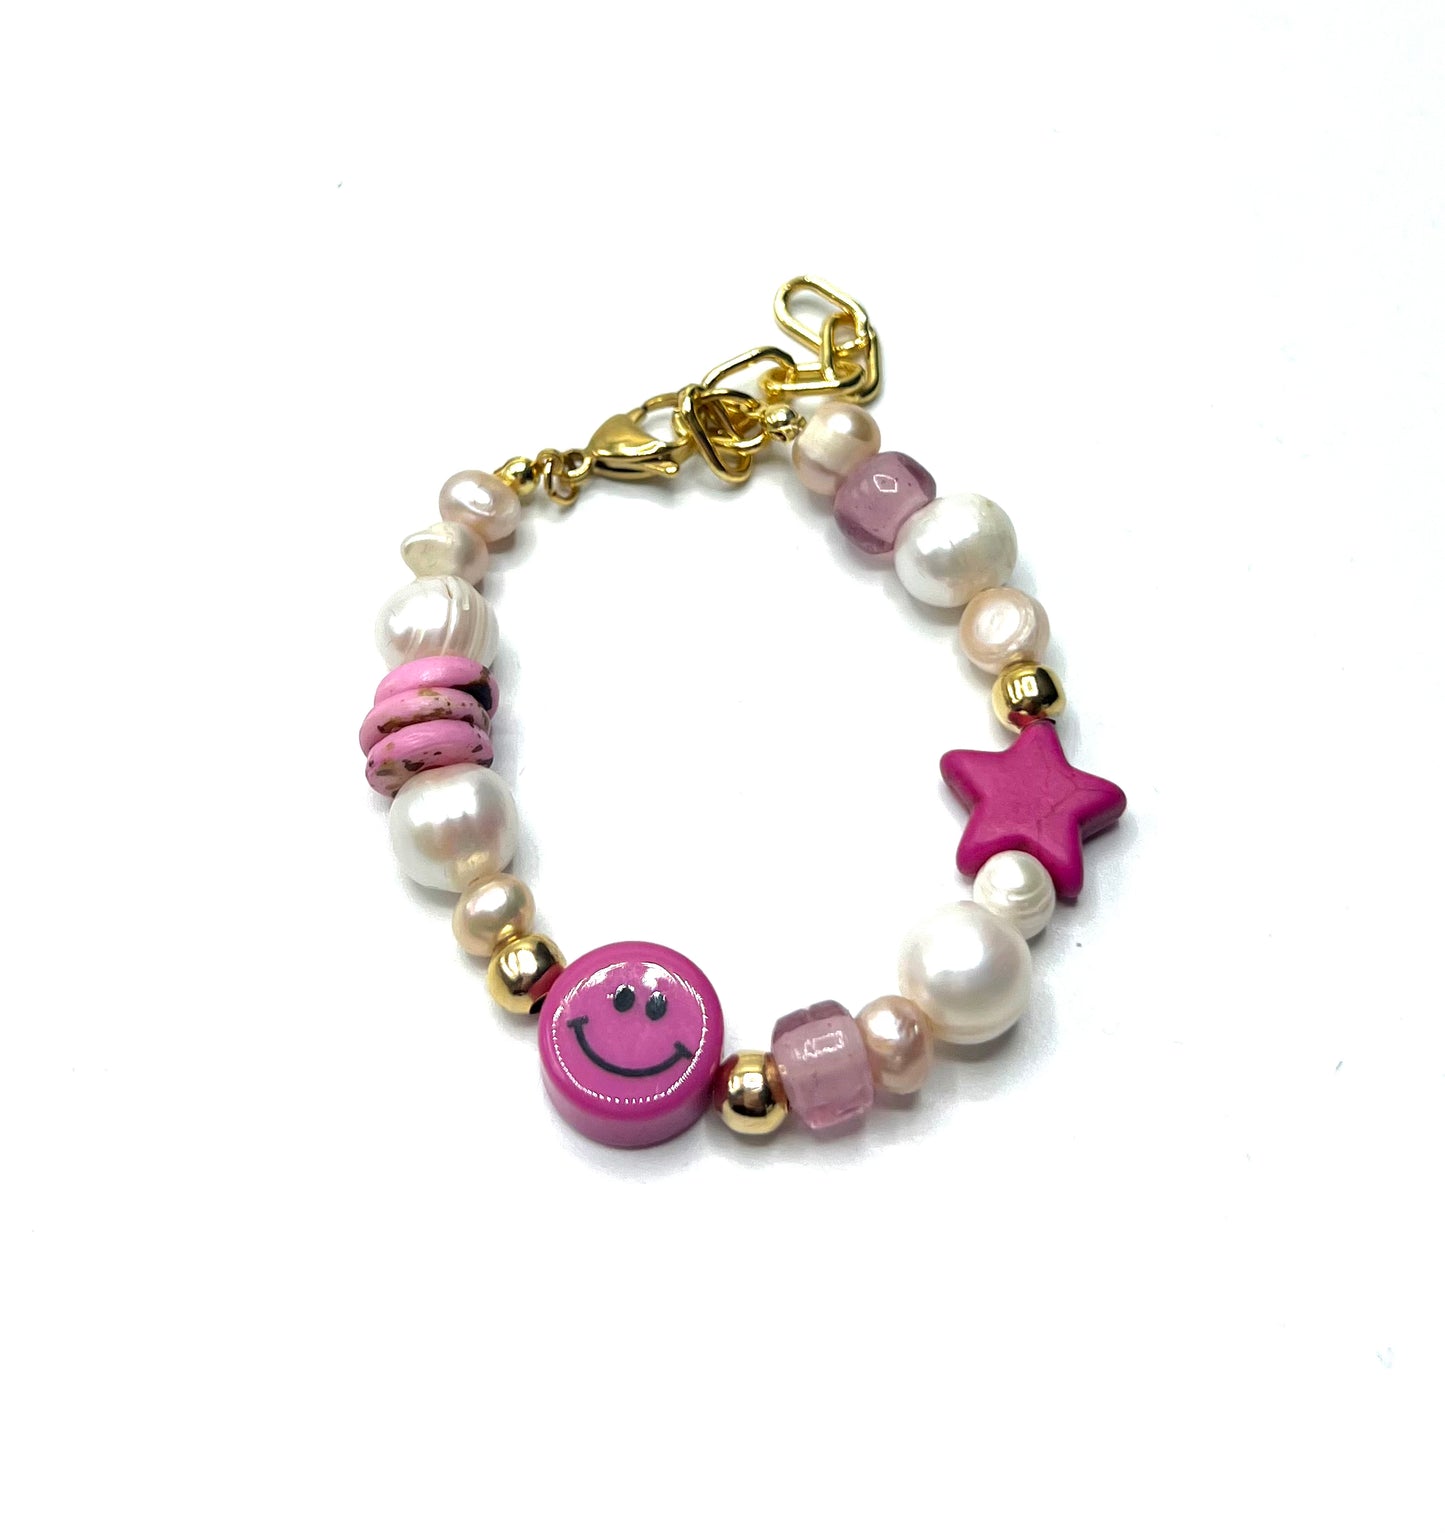 ONE OF A KIND PEARL BRACELET